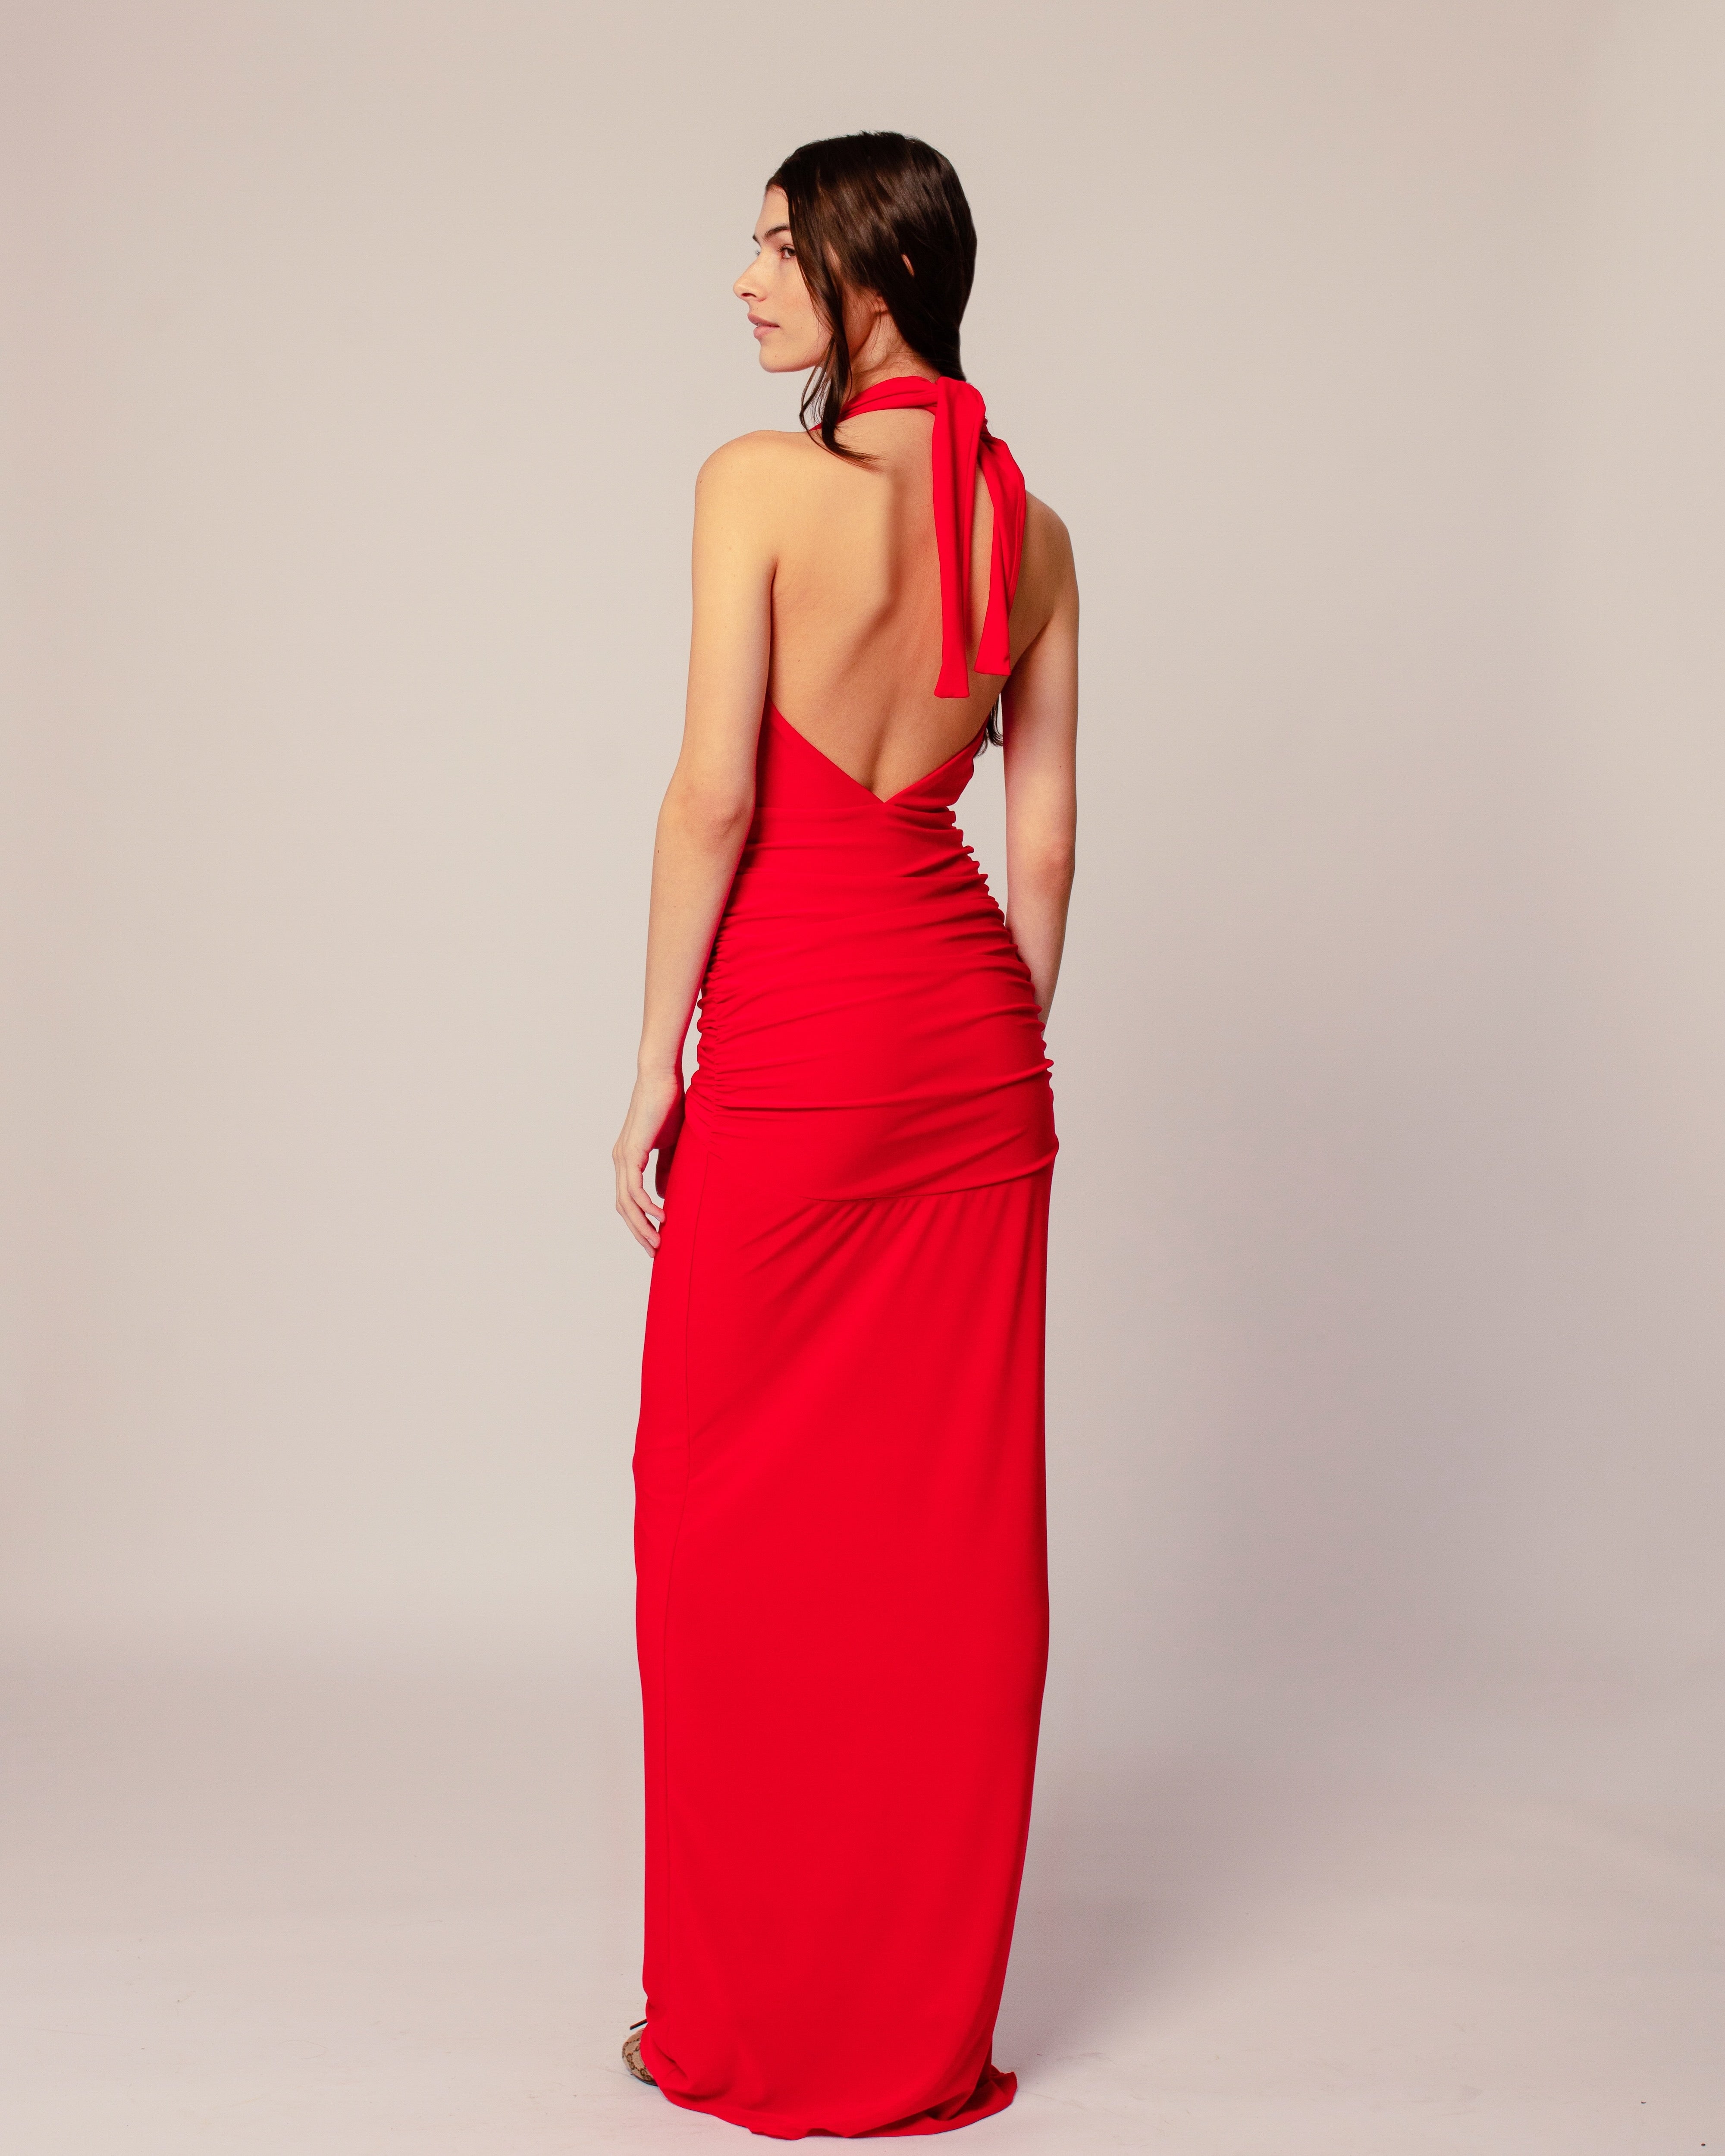 Halter Dress in Candy Apple Red